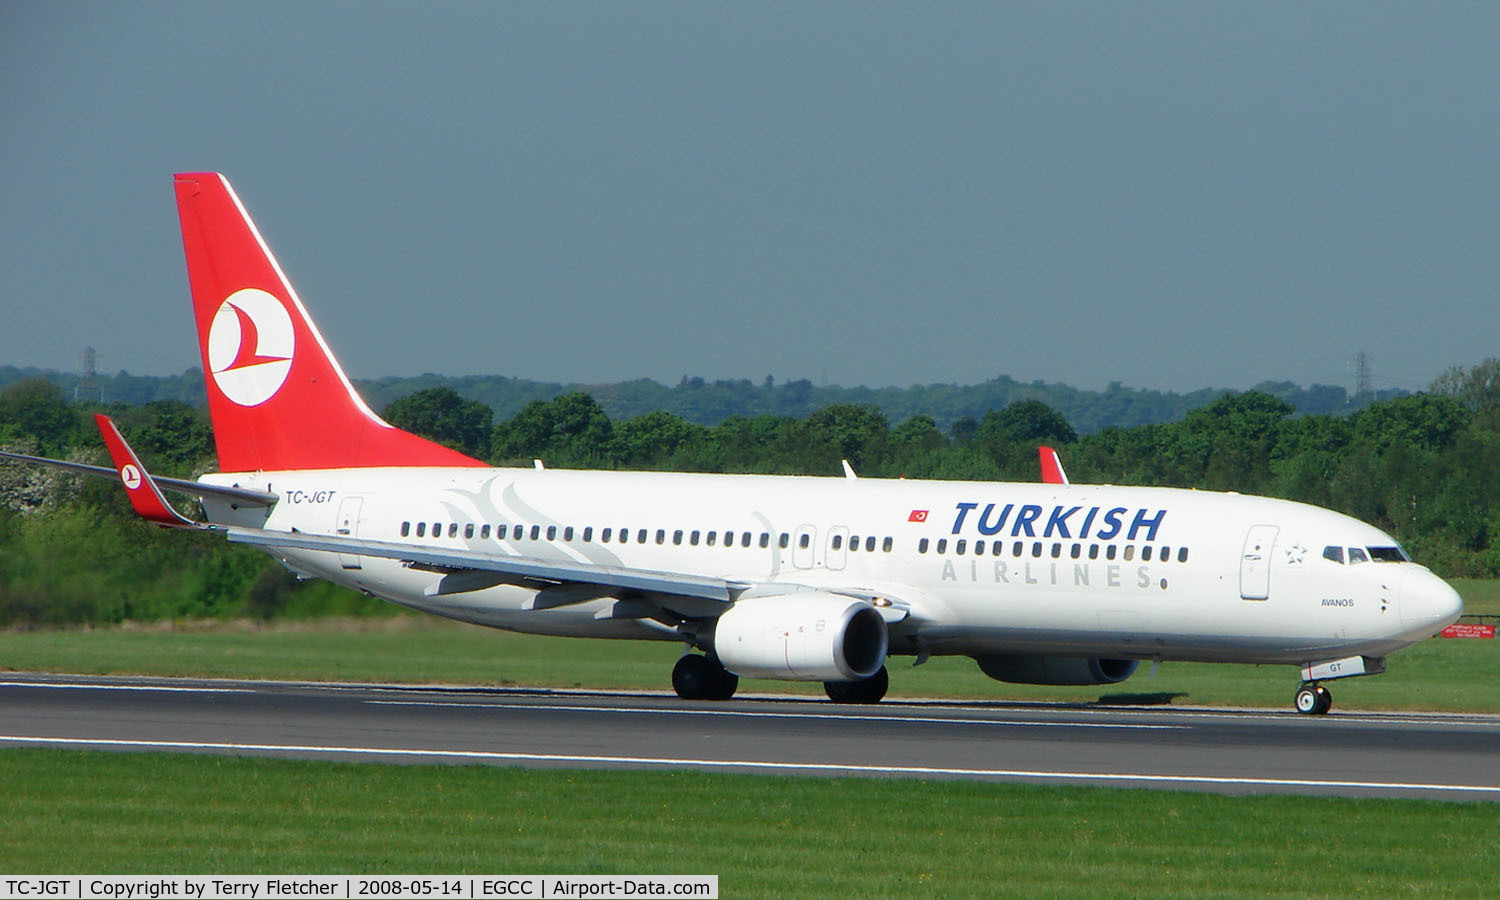 TC-JGT, 2006 Boeing 737-8F2 C/N 34417, Some of the typical traffic that can be seen at Manchester (Ringway)  International